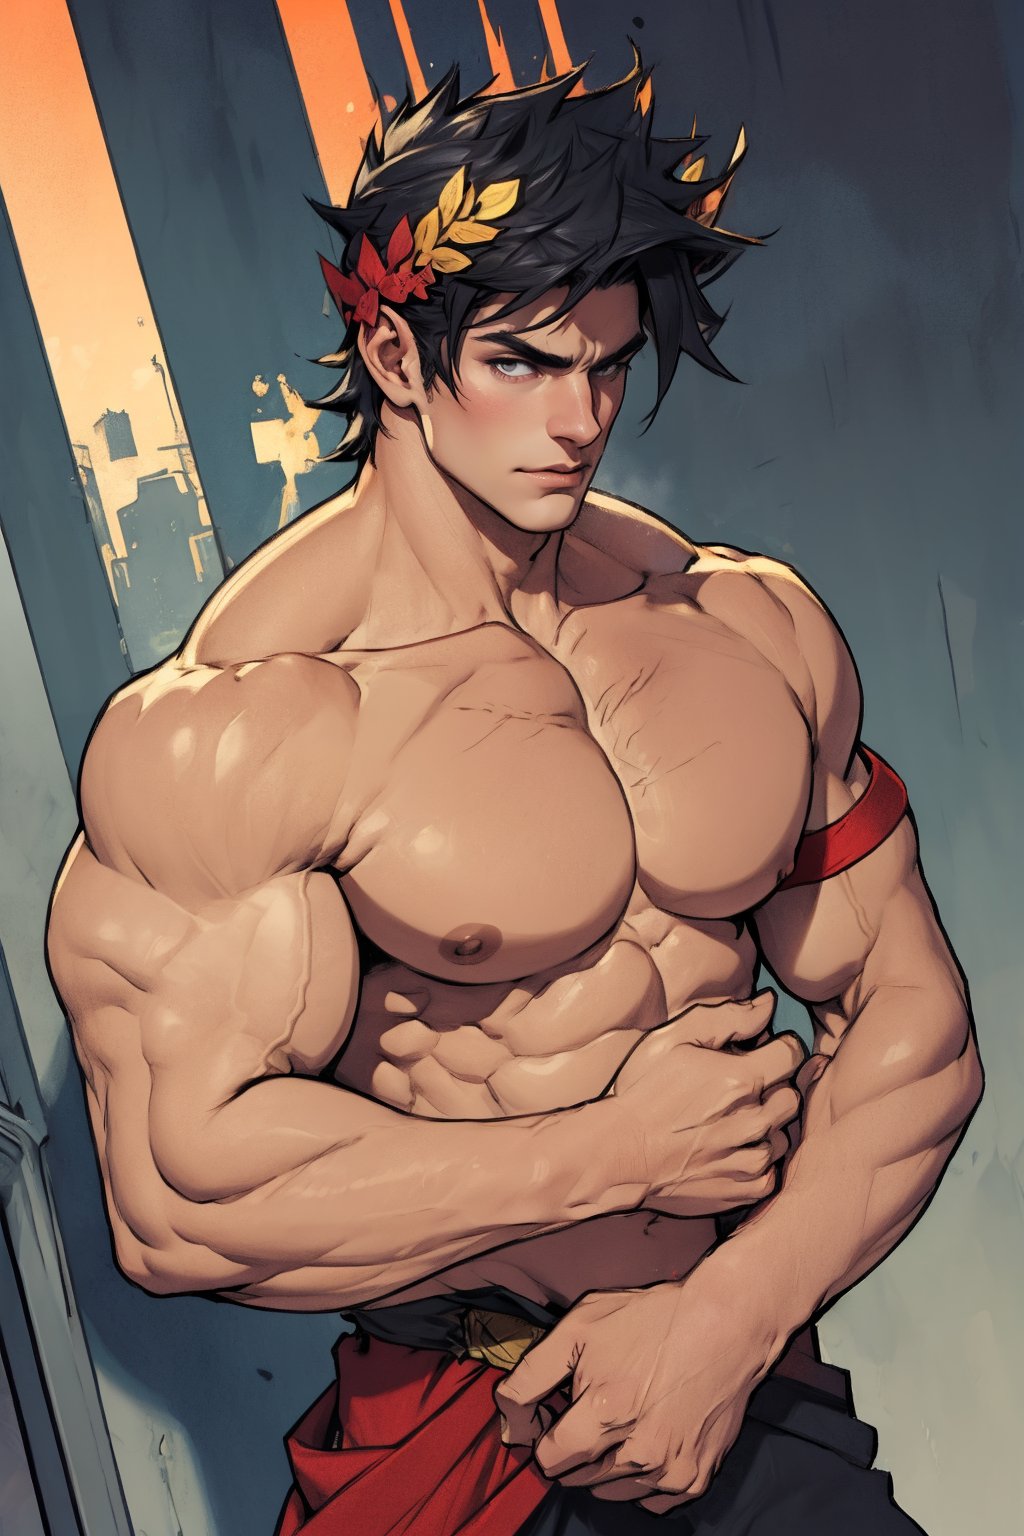 Zagreus with large muscular body shape